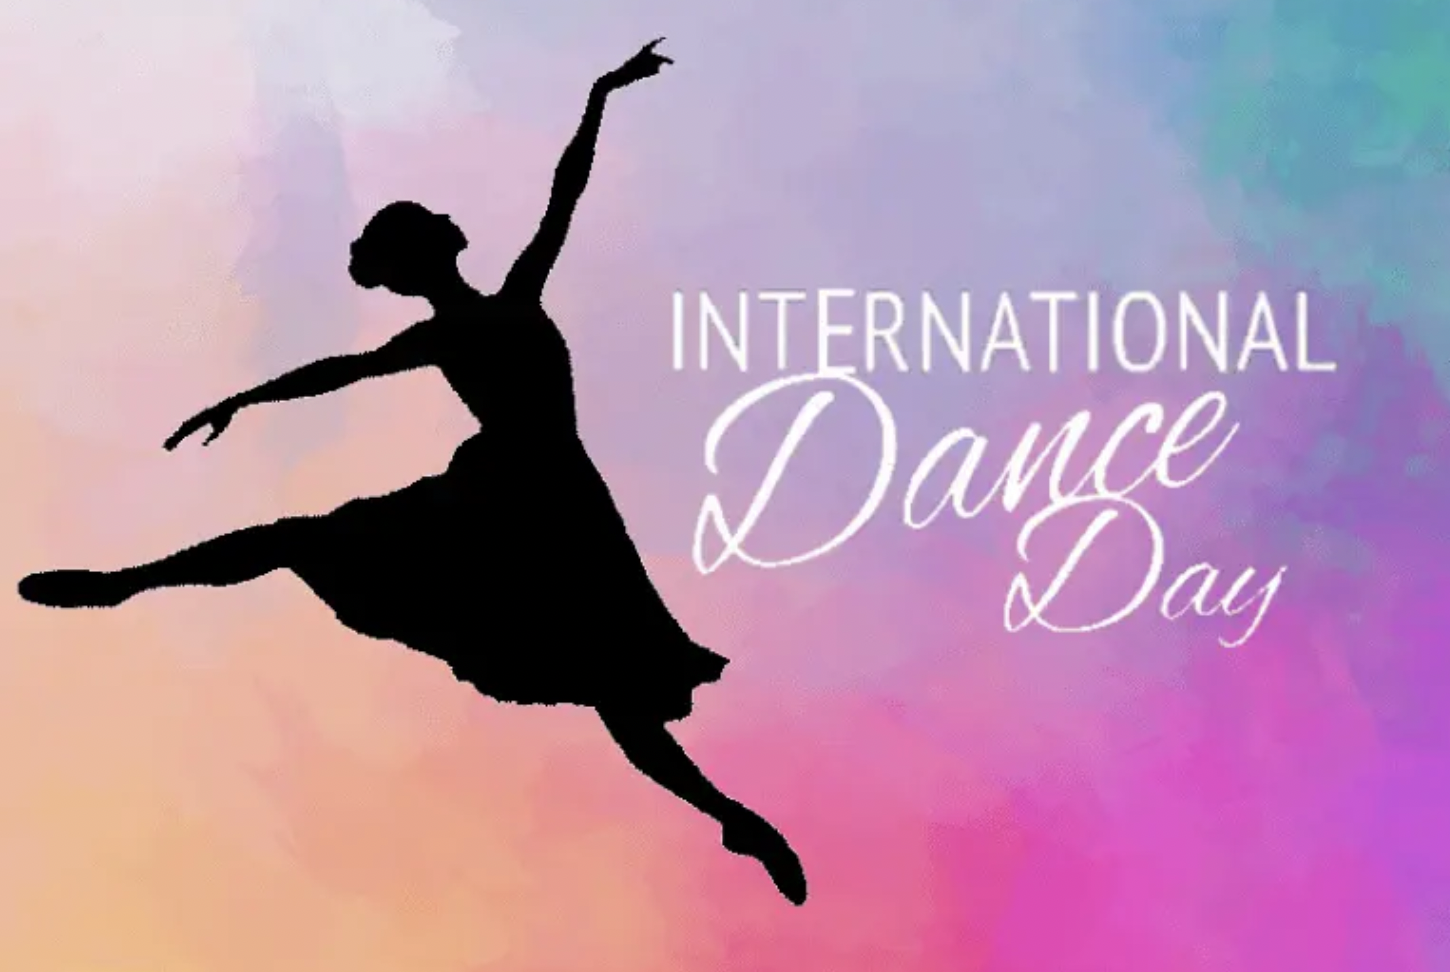 Dance Central Shines on International Dance Day with the ISTD